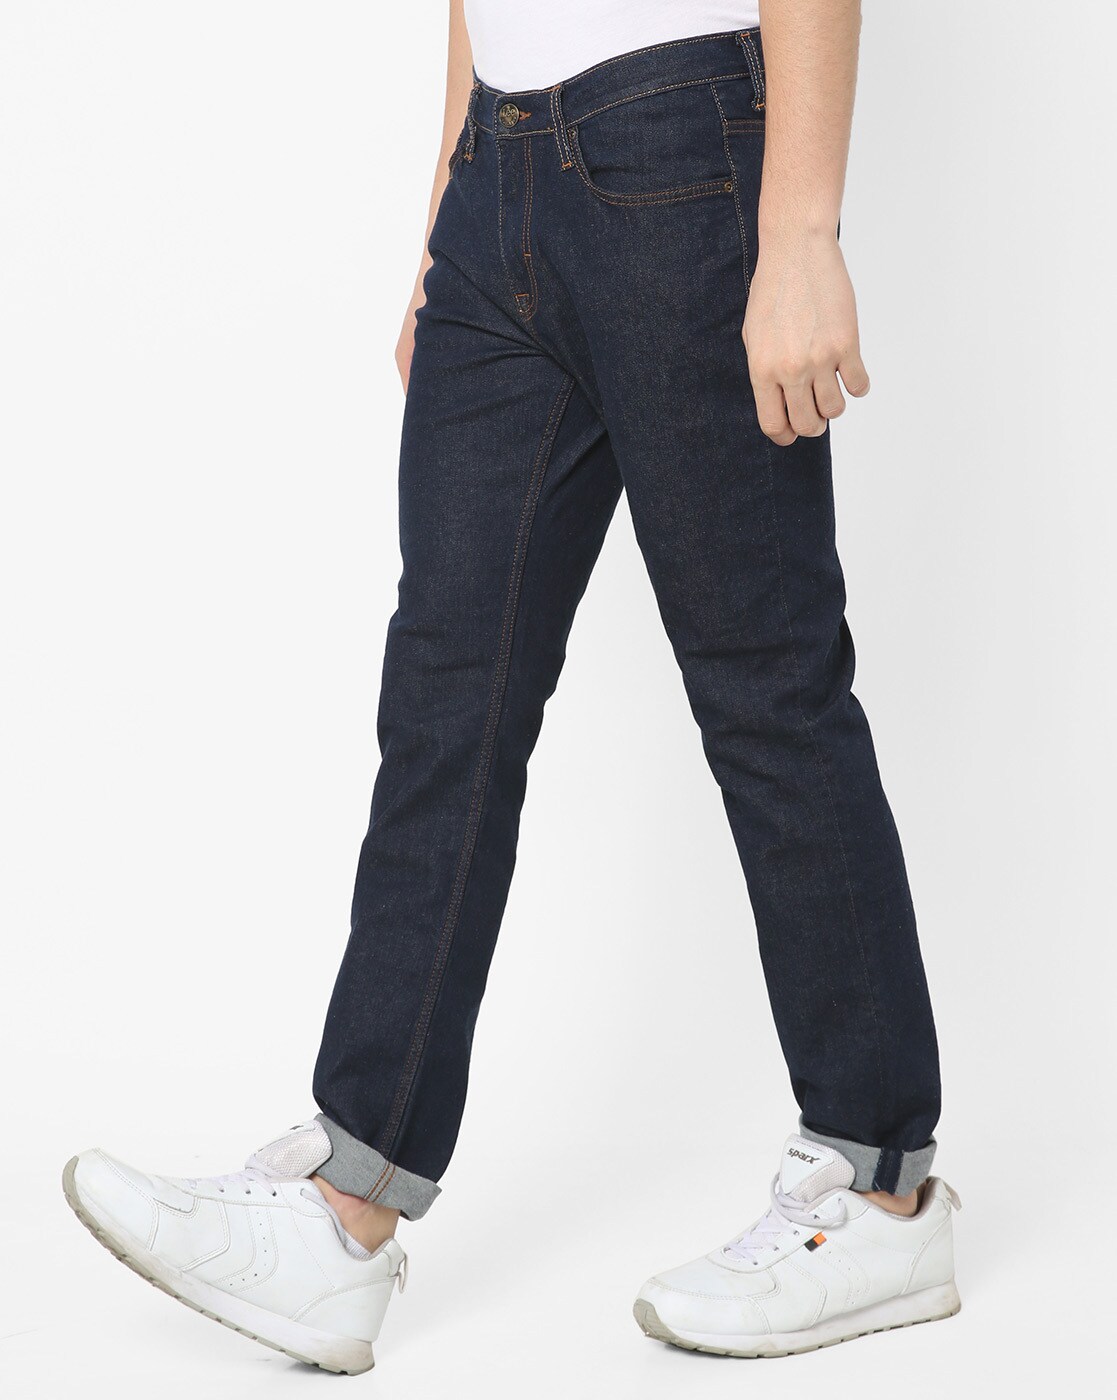 lee bruce jeans